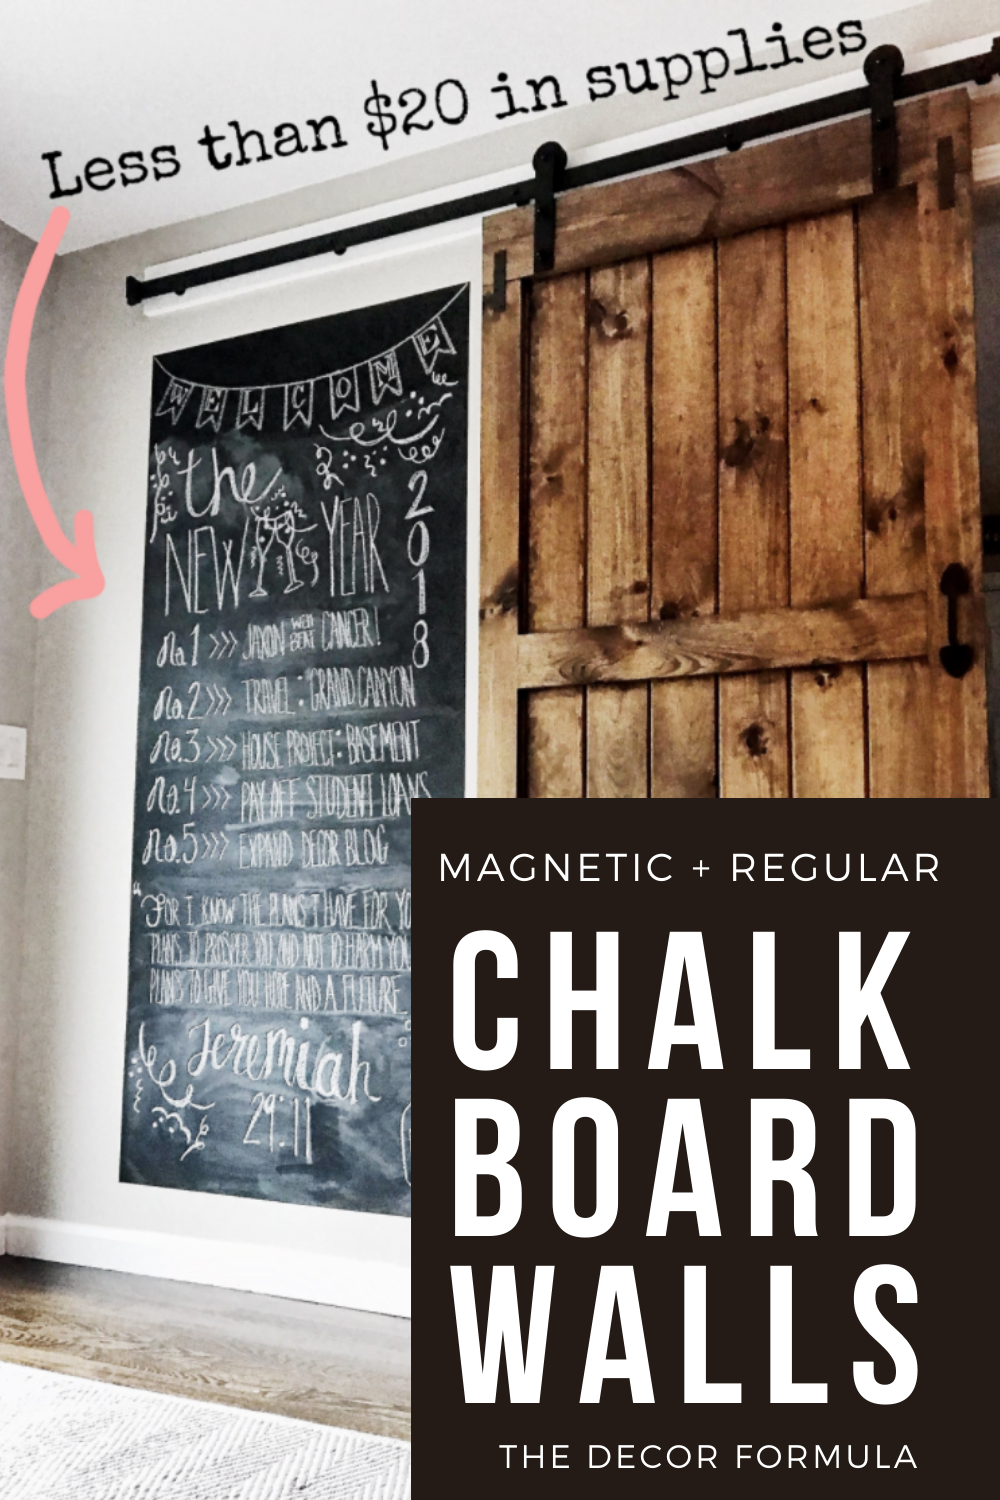 Chalkboard Made From Reclaimed Pallet Wood With Chalk Shelf.